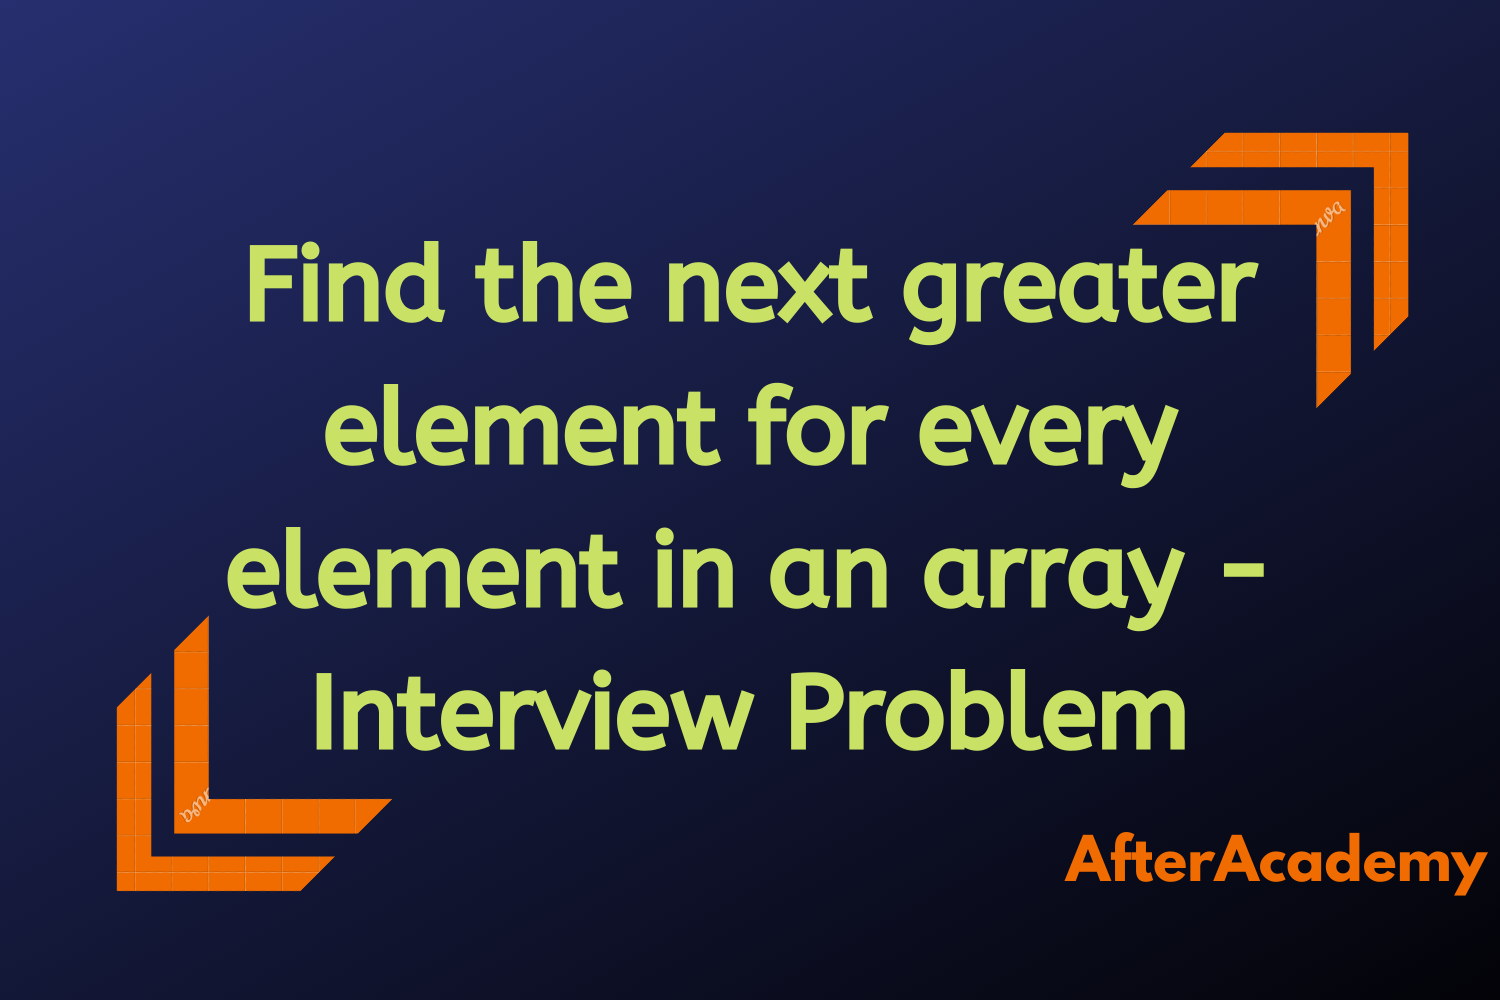 Find the next greater element for every element in an array - Interview Problem